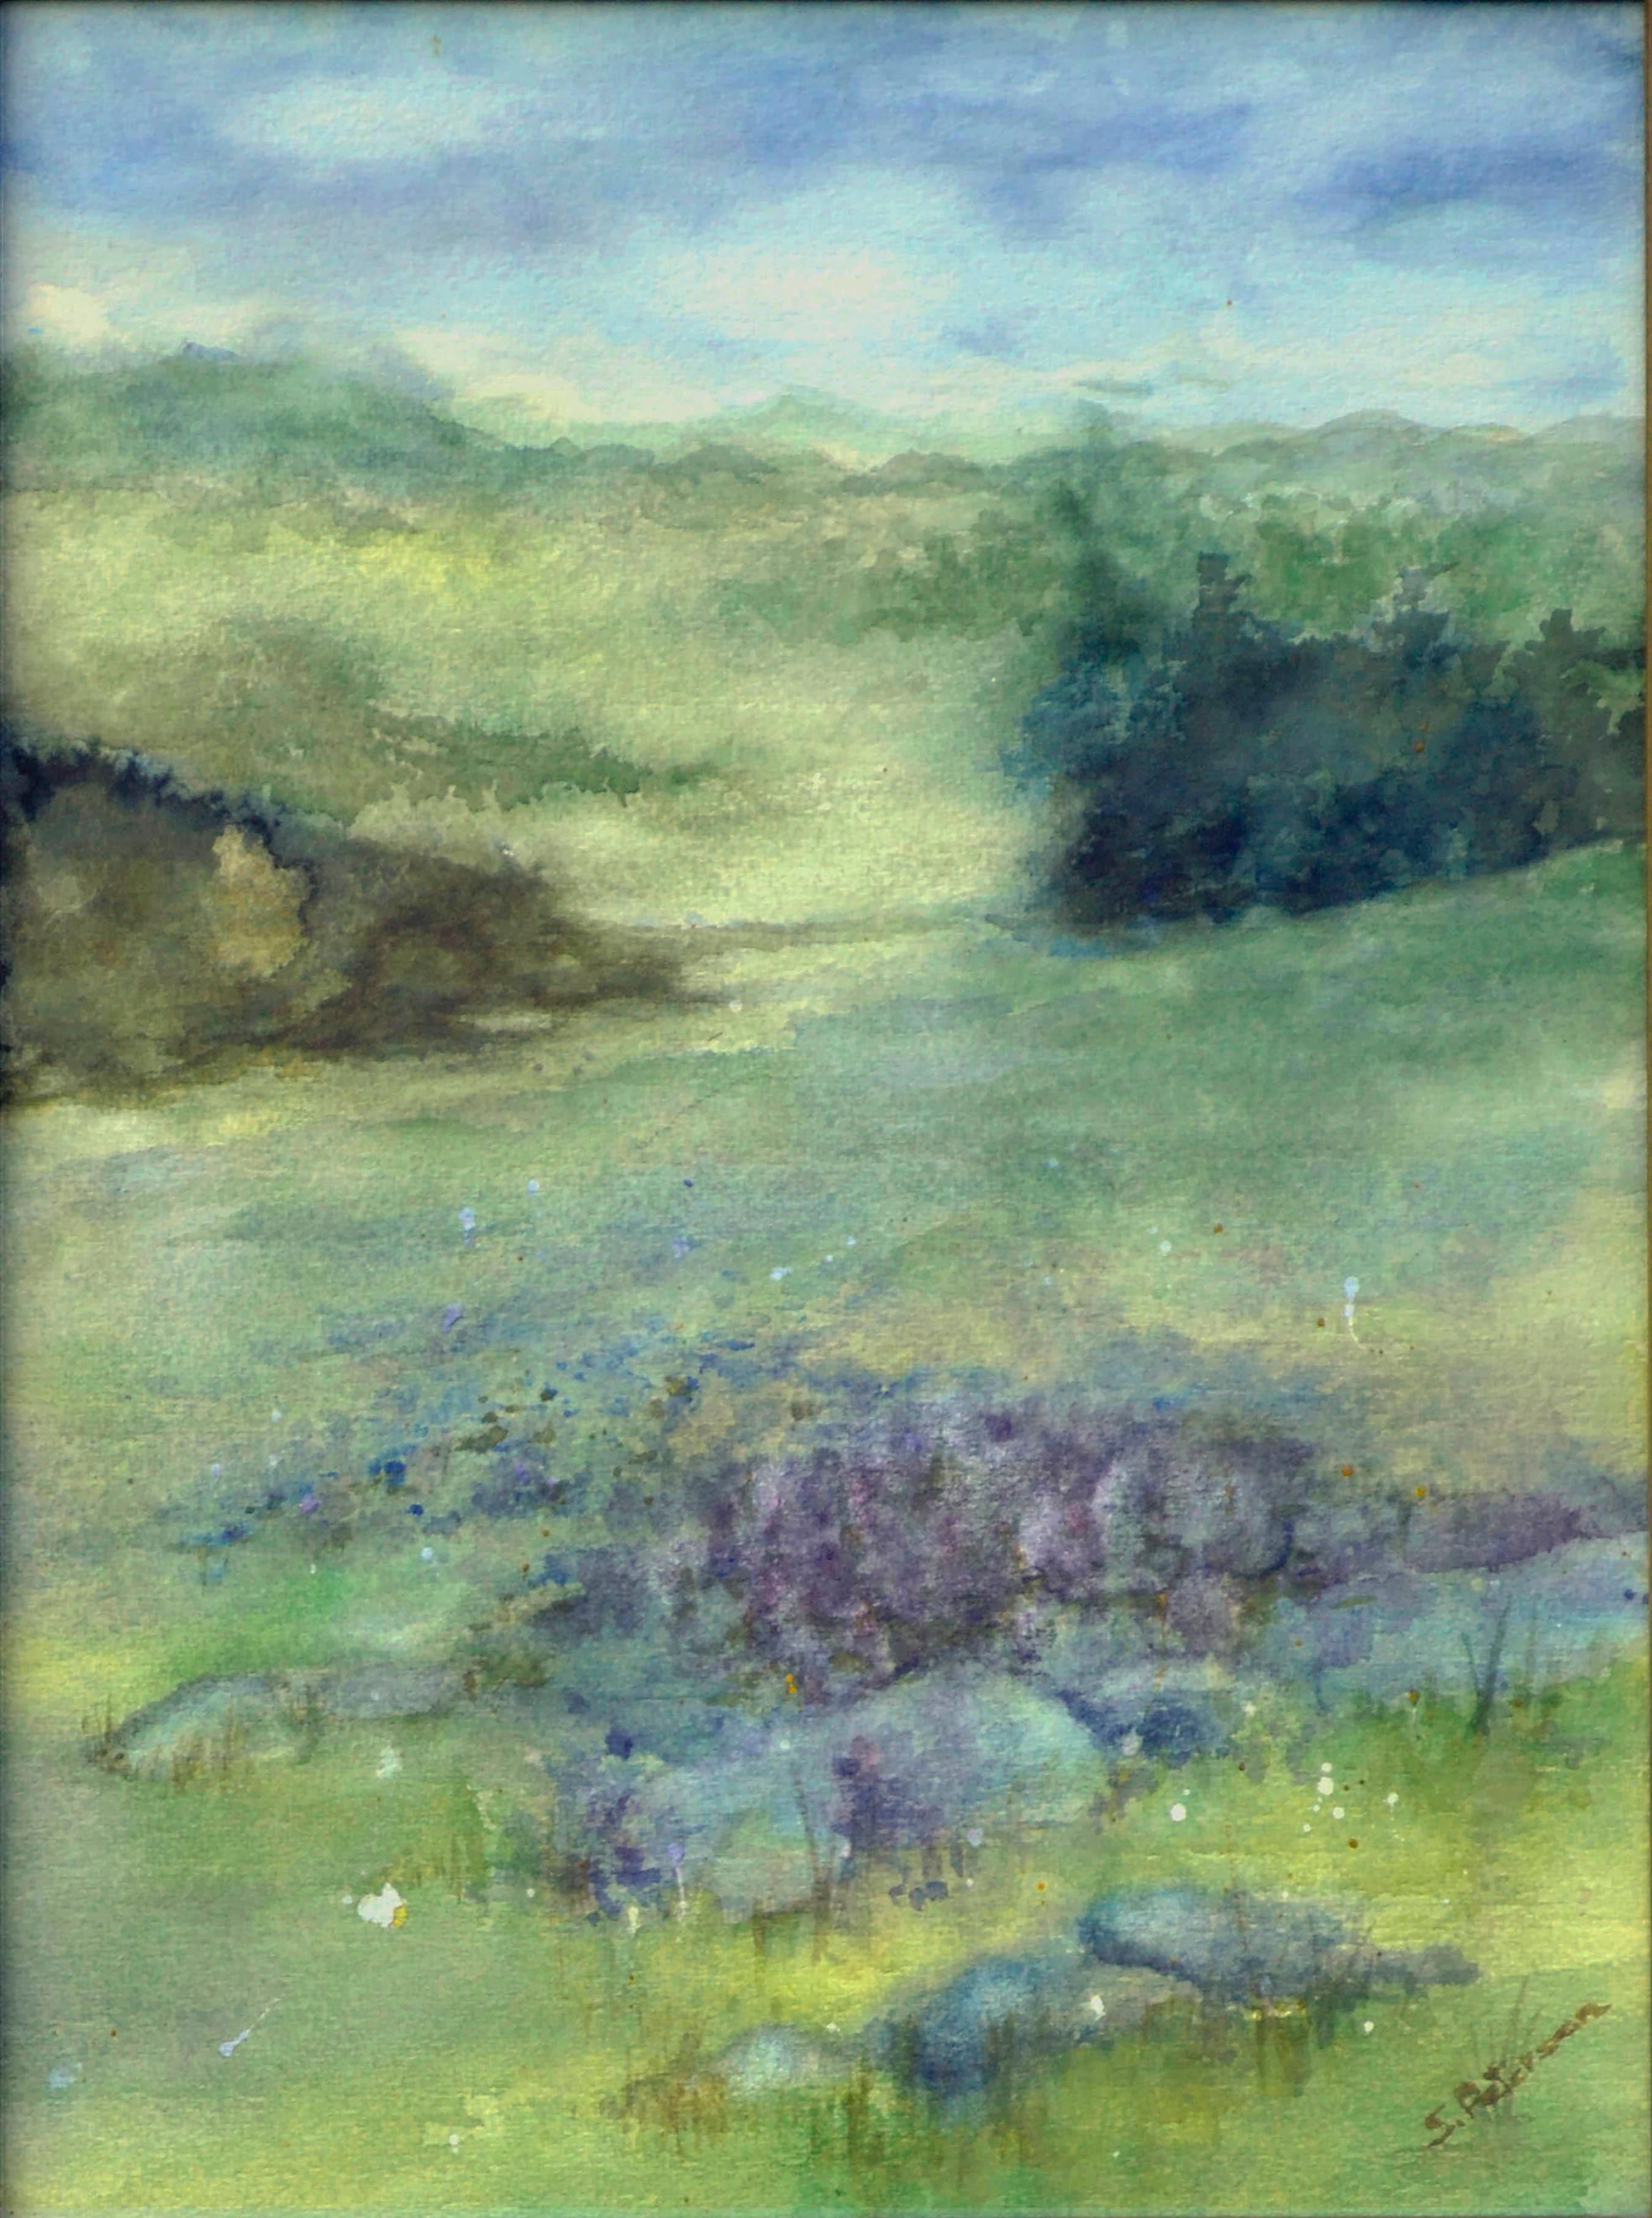 Blooming Hills Landscape - Painting by S. Peterson